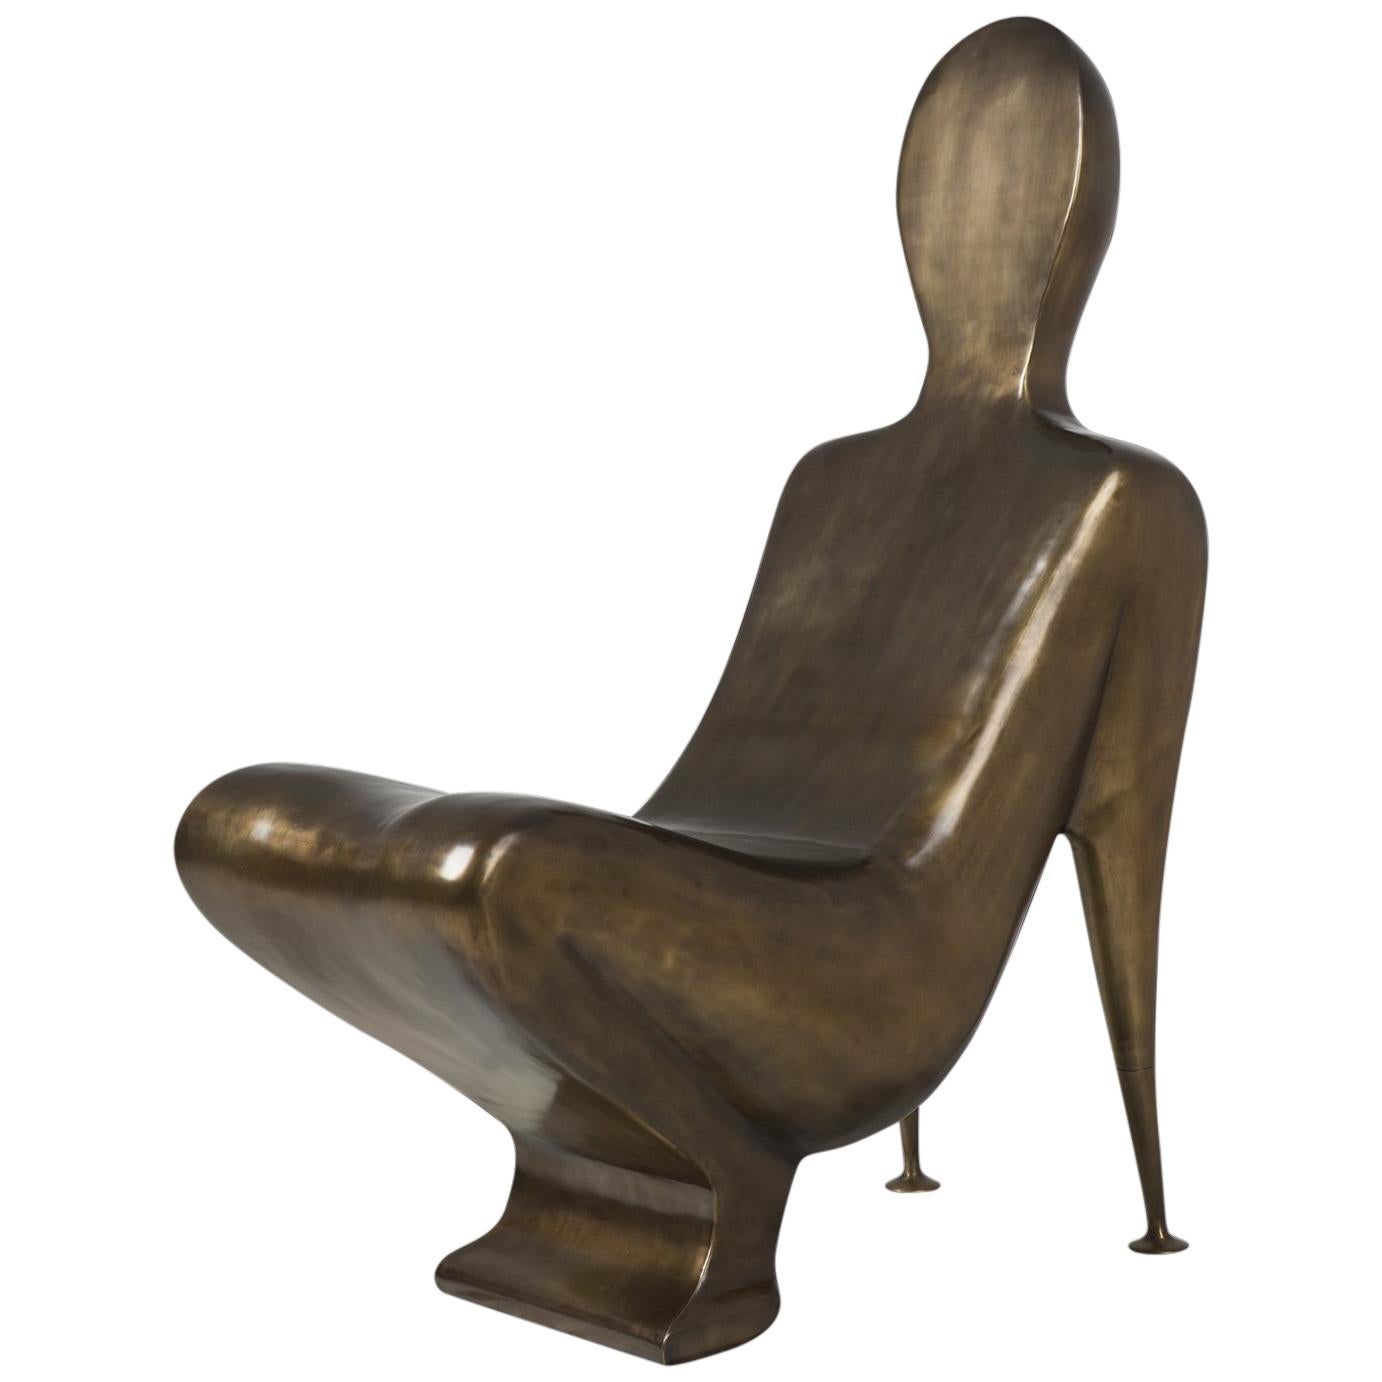 Human Brass Chair in Solid Antique Brass